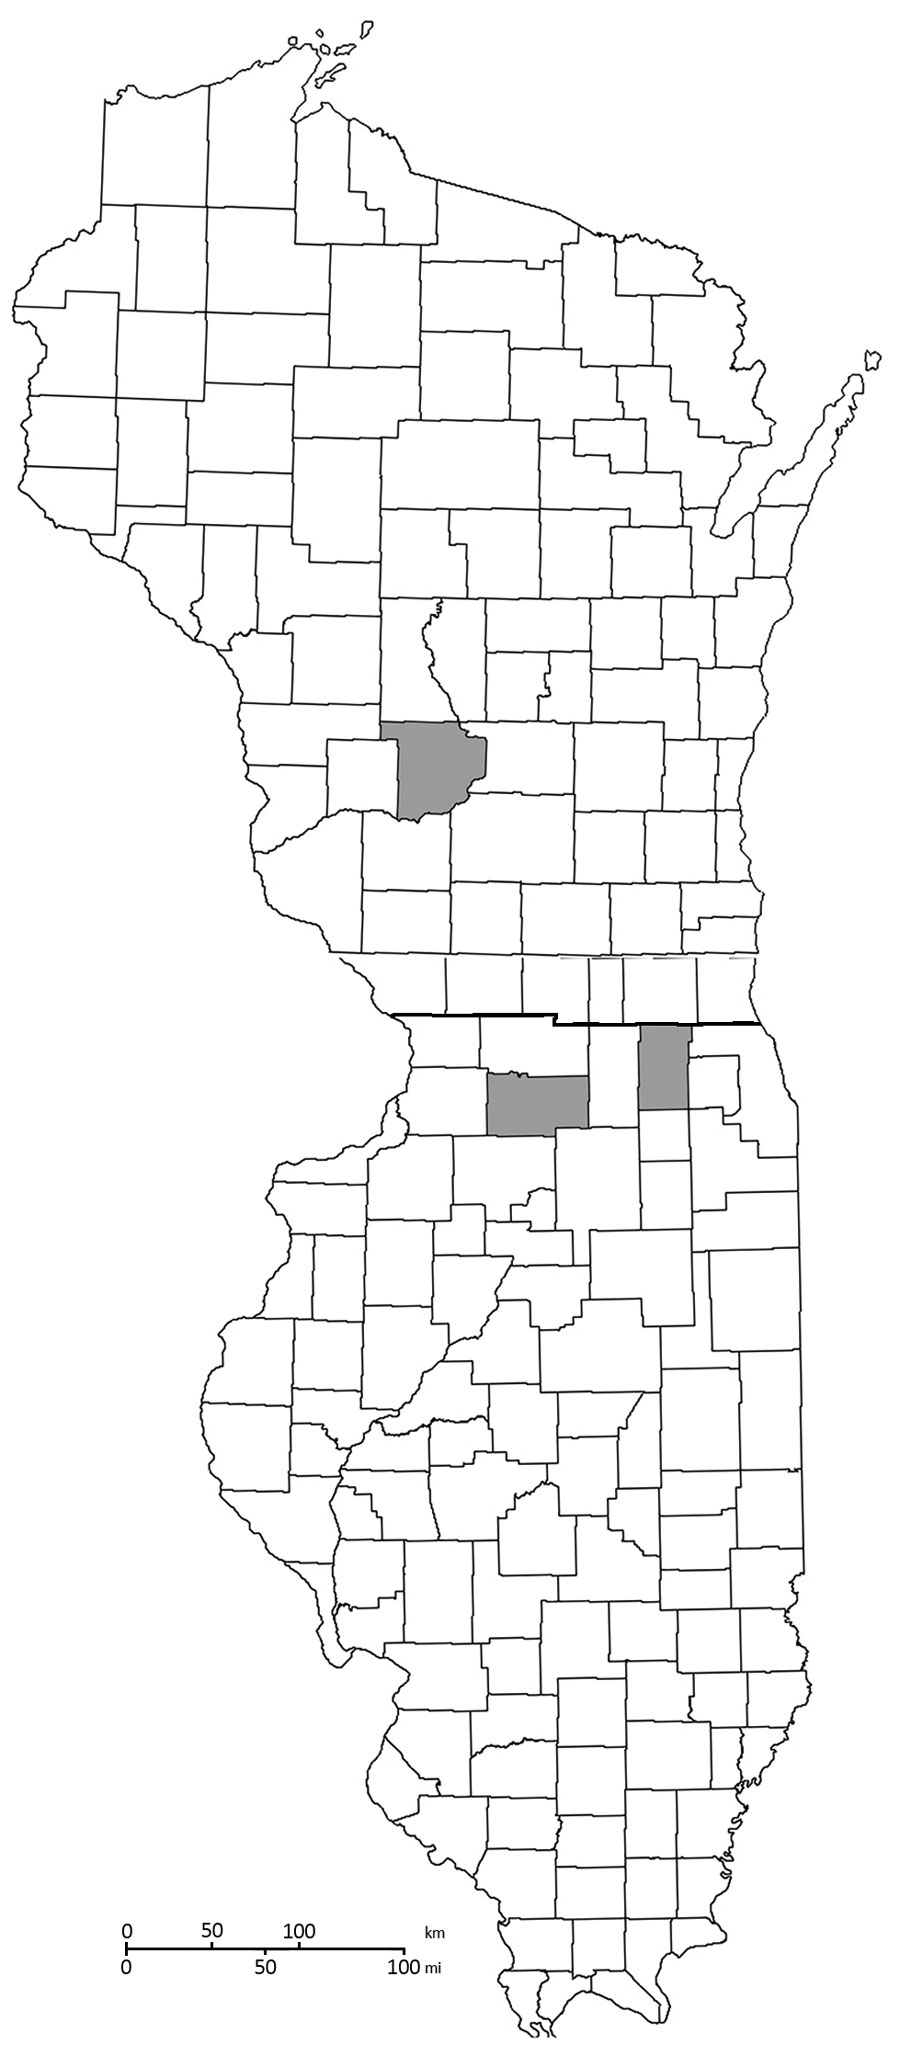 Location (gray areas) of turtles PCR positive for Coxiella burnetii, by county, Wisconsin (top) and Illinois (bottom), USA. 